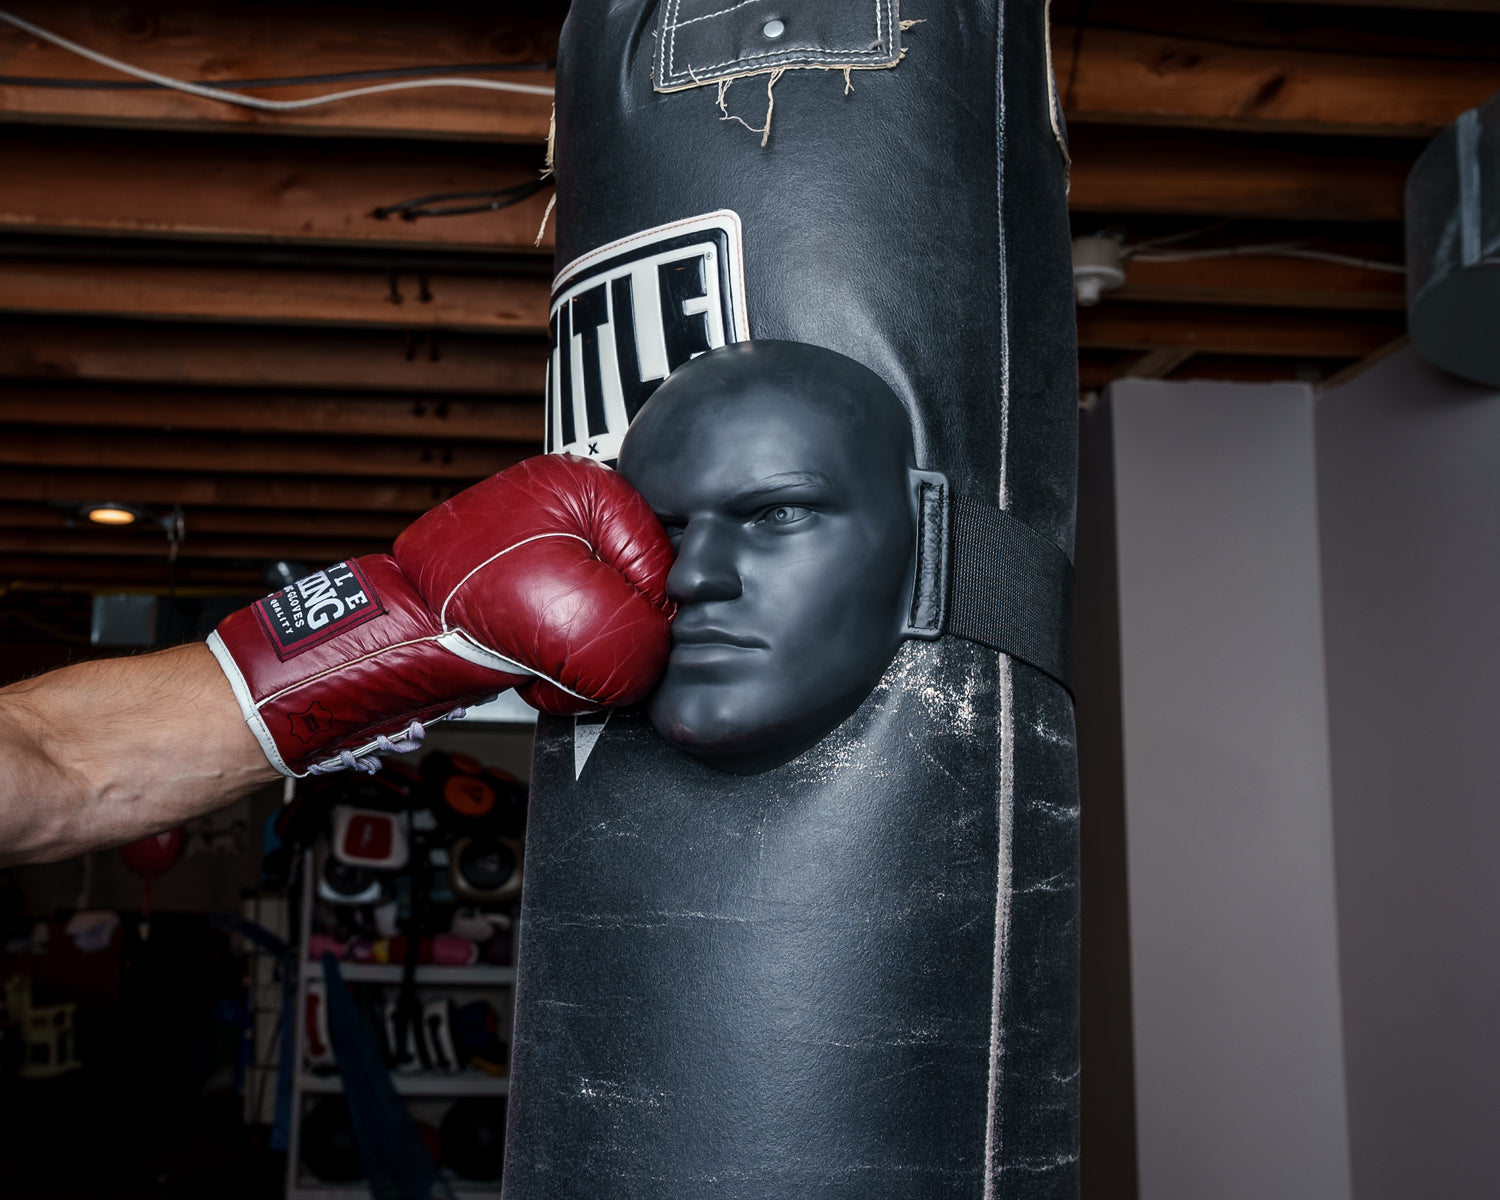 Title Boxing Equipment: Boxing Gloves, Punching Bags, Boxing Shoes